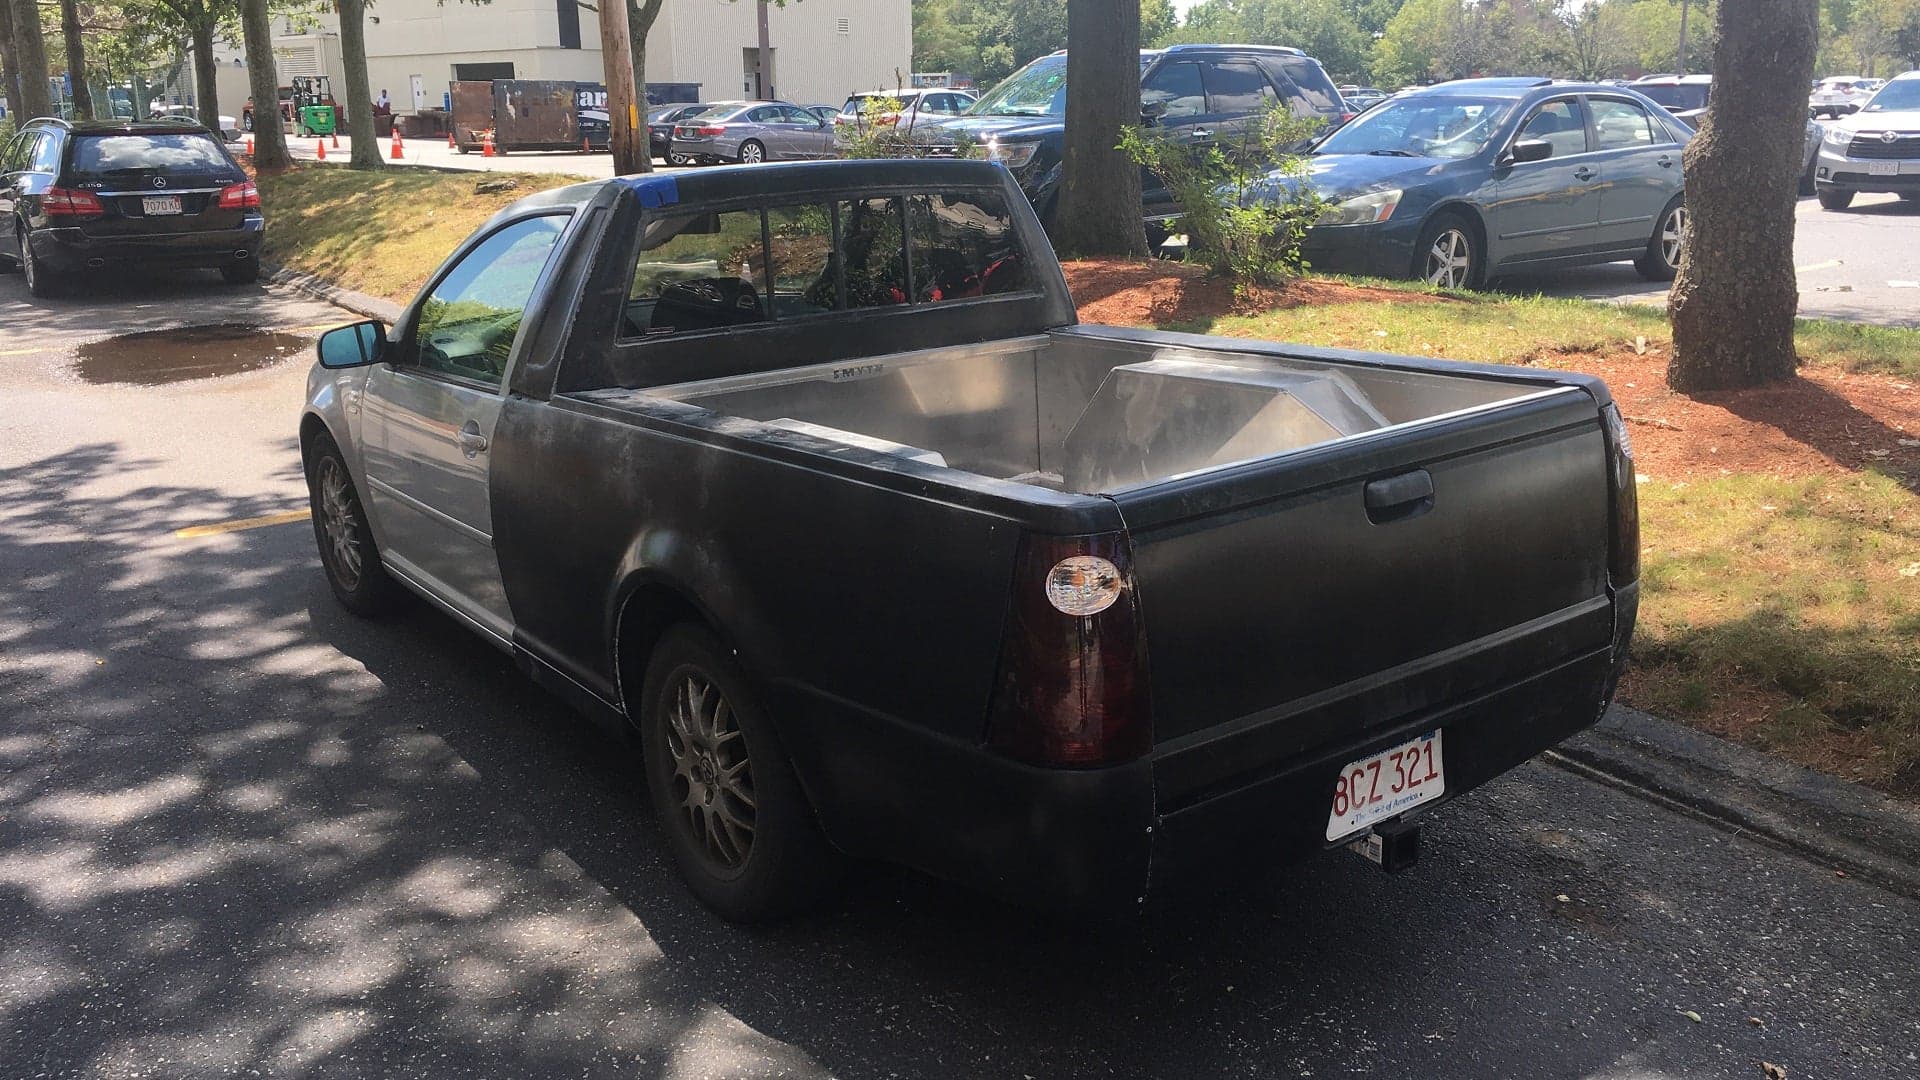 We Messed Up Our VW Jetta Smyth Ute’s Back Window